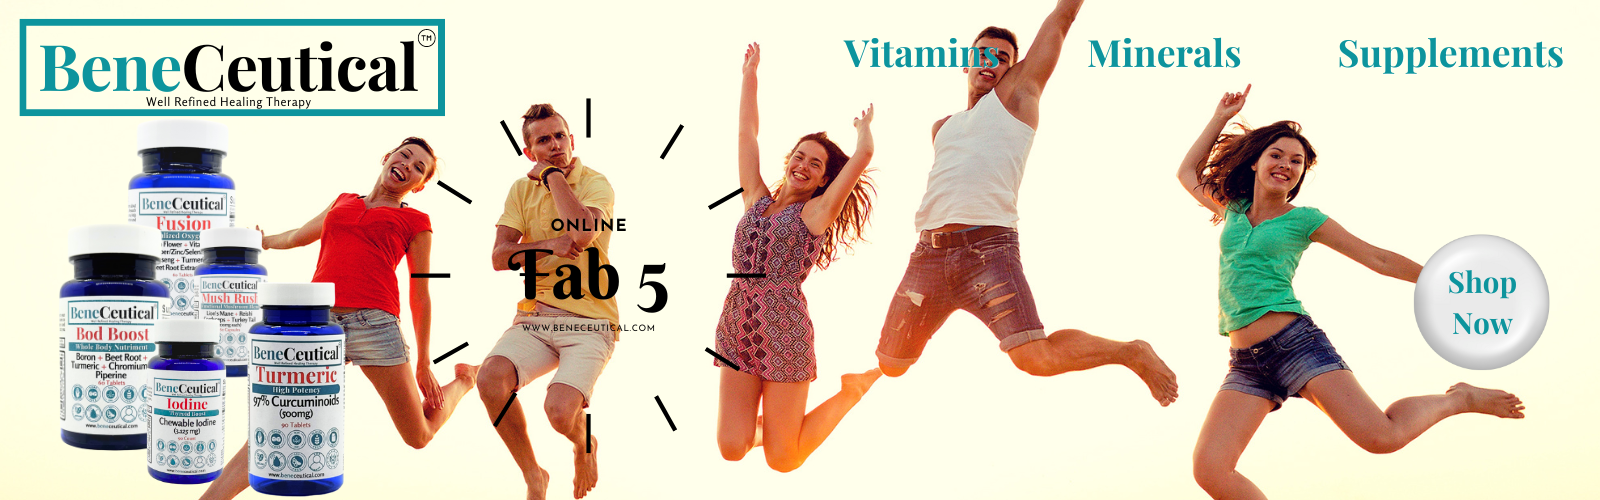 Discover the ‘Fab 5’ of holistic health with BeneCeutical: Fusion, Mush Rush, Bod Boost, Iodine, and Turmeric - your allies for a vibrant, healthier life.